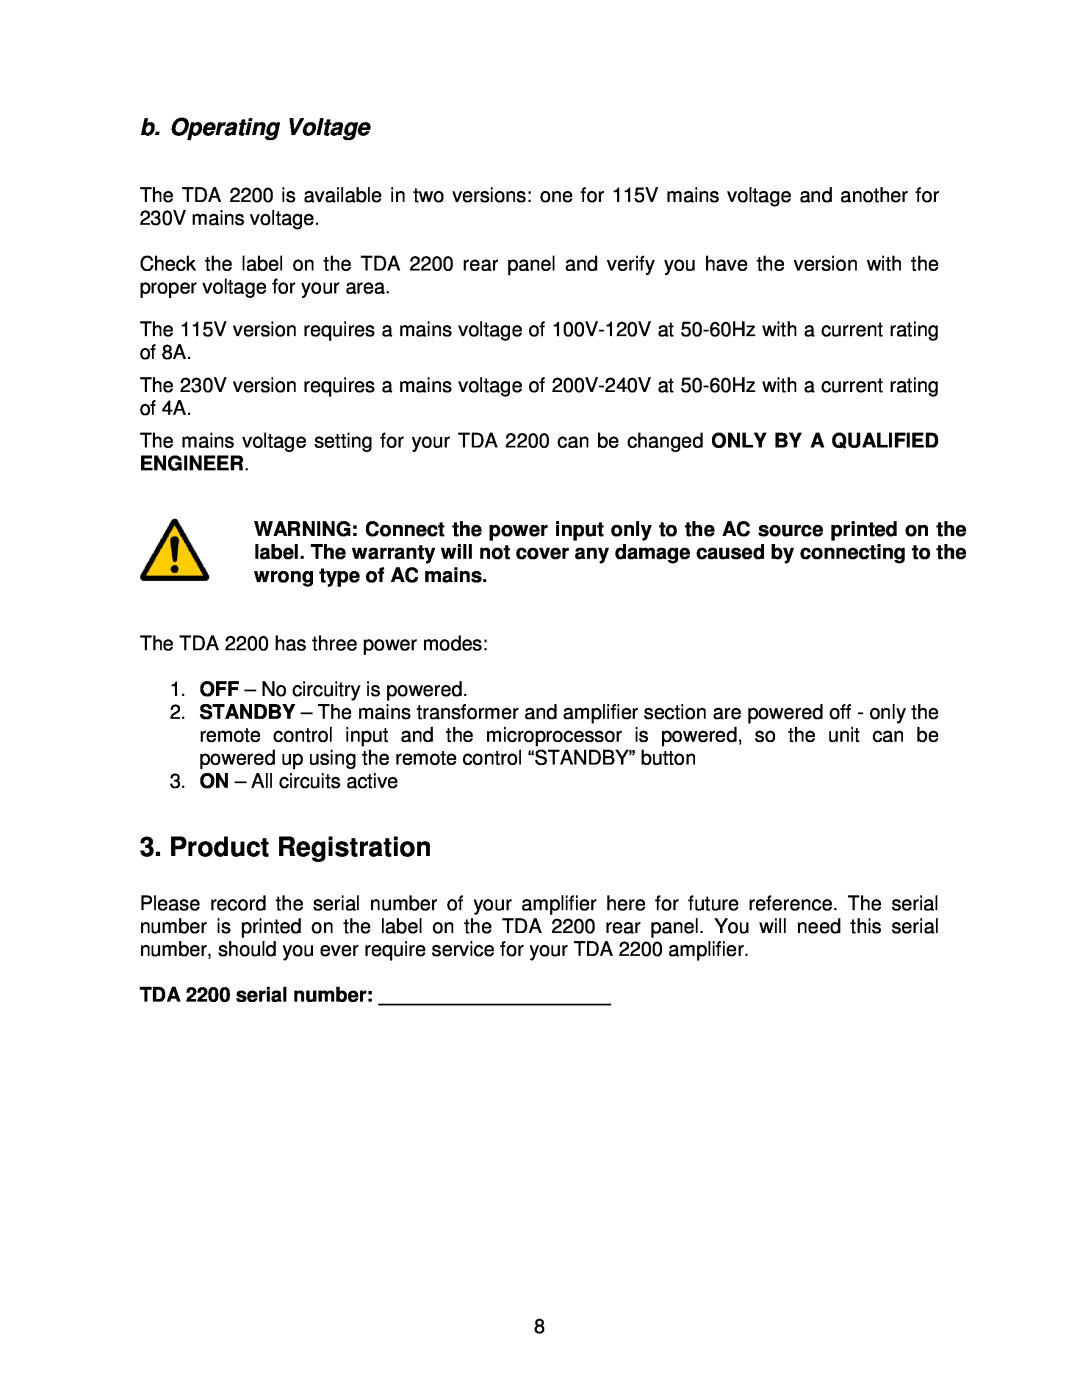 Lyngdorf Audio TDA 2200 owner manual Product Registration, b. Operating Voltage 